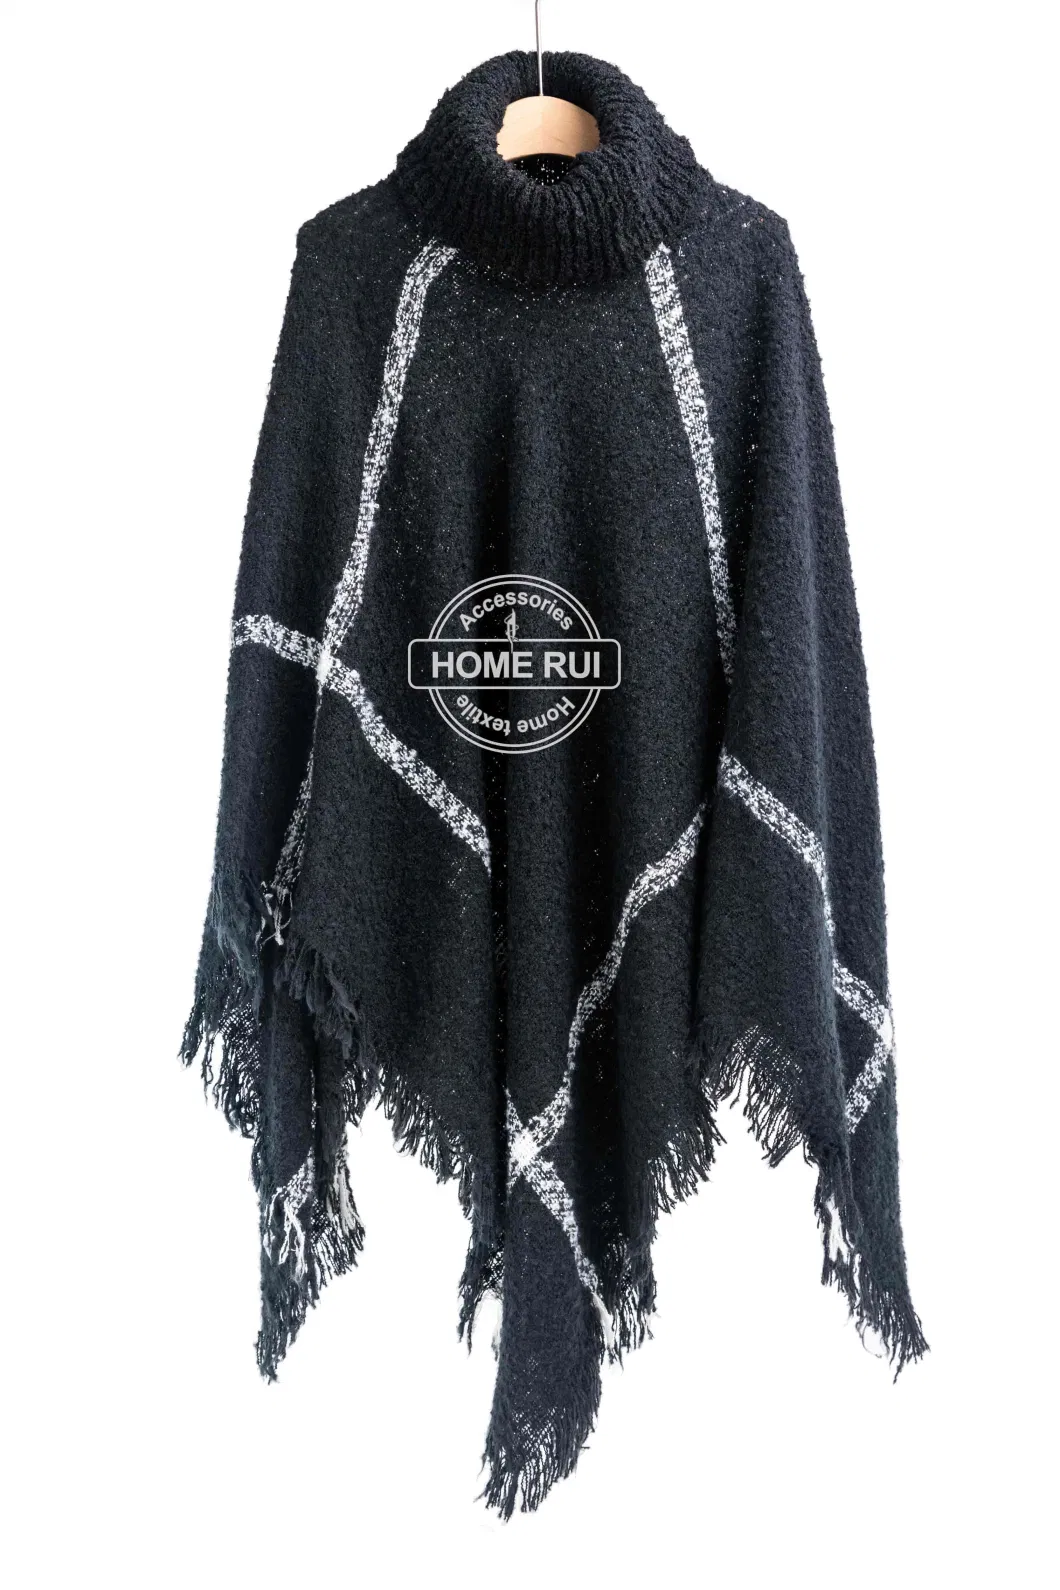 Supplier Outfit Fall Winter Lady Fashion Woven Plus Batwing Classic Knitted Block Tassel Wraps Nova Scottish Plaid Checks Sweater Poncho Cape High Neck Cloack